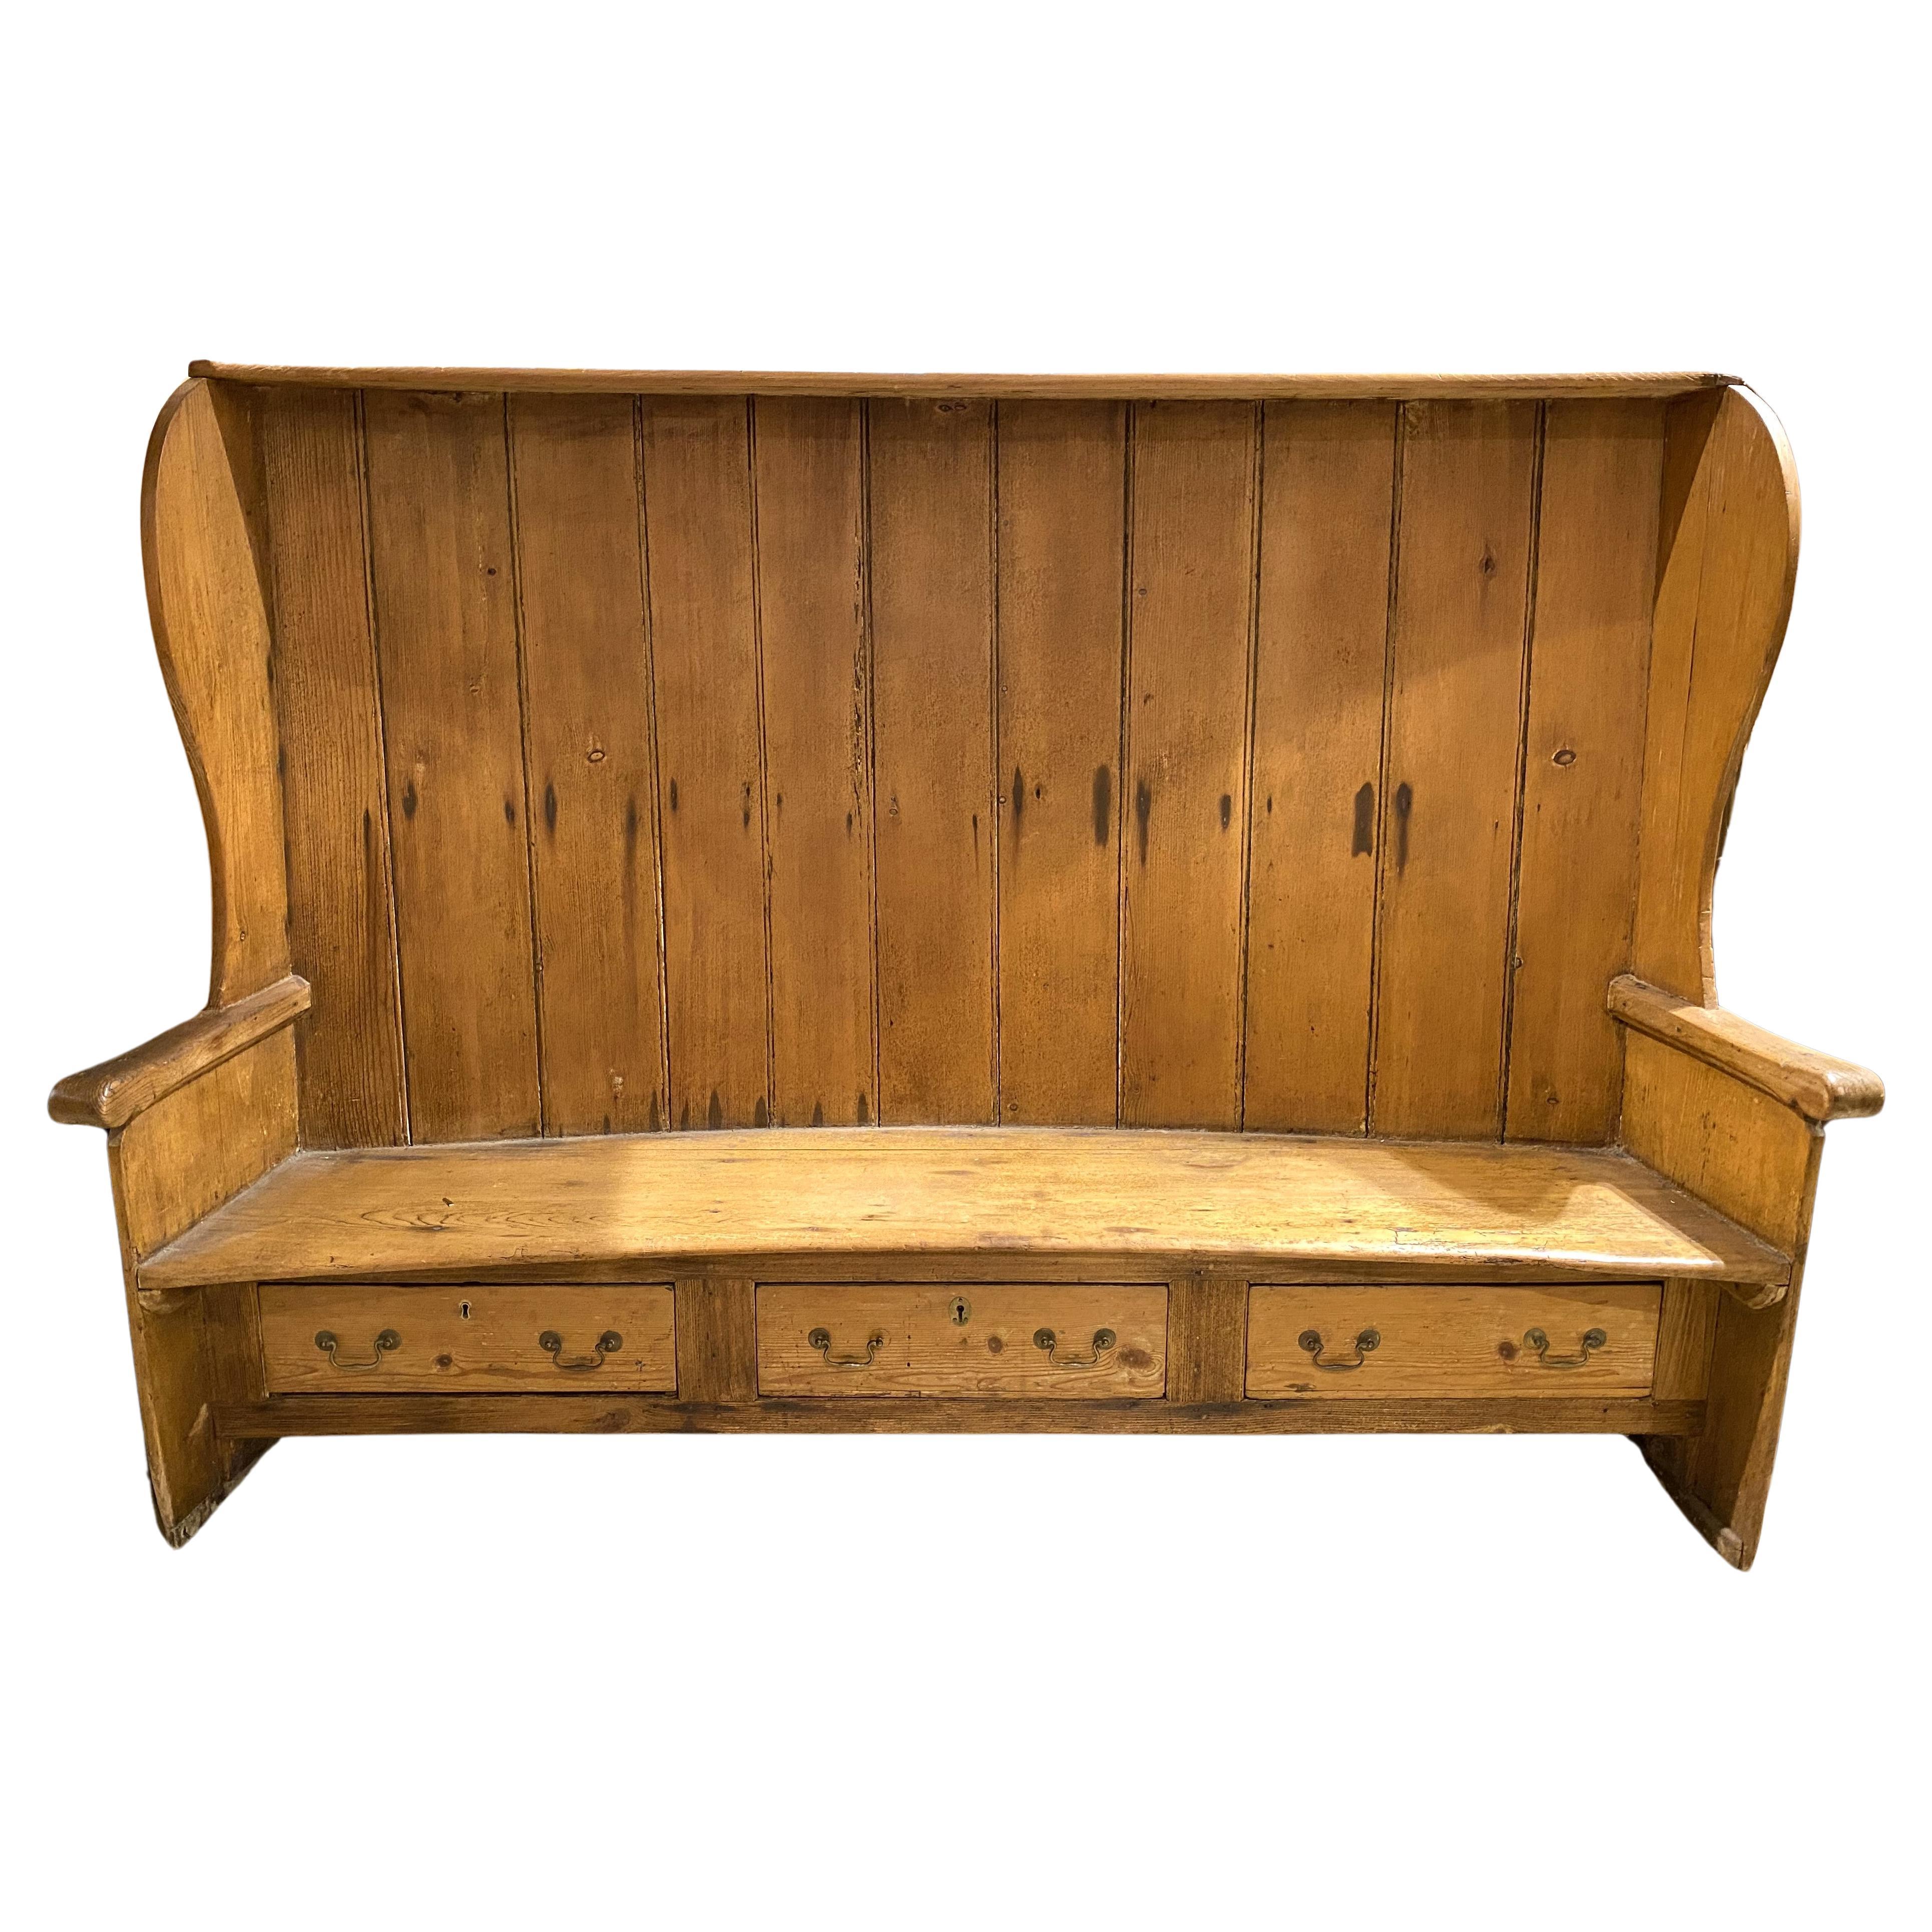 Late 18th Century Large English Pine Bow Back Settle Bench